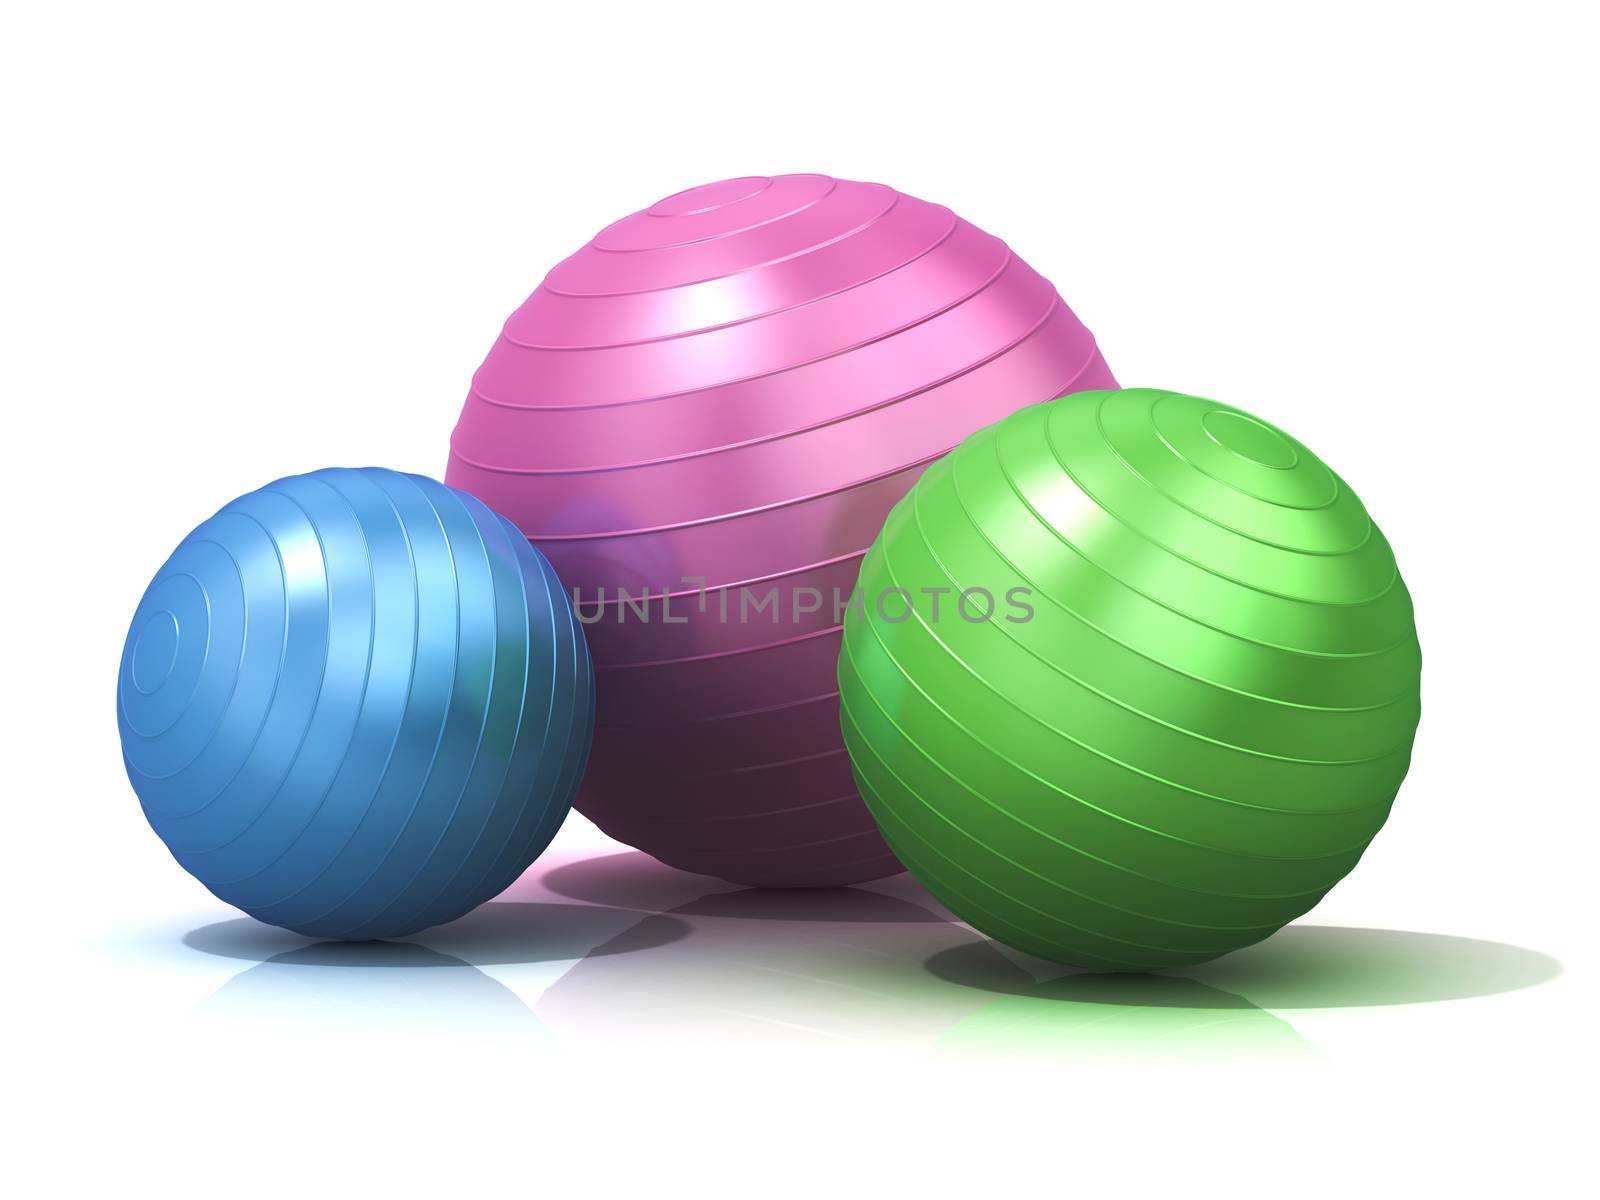 Colorful fitness balls by djmilic